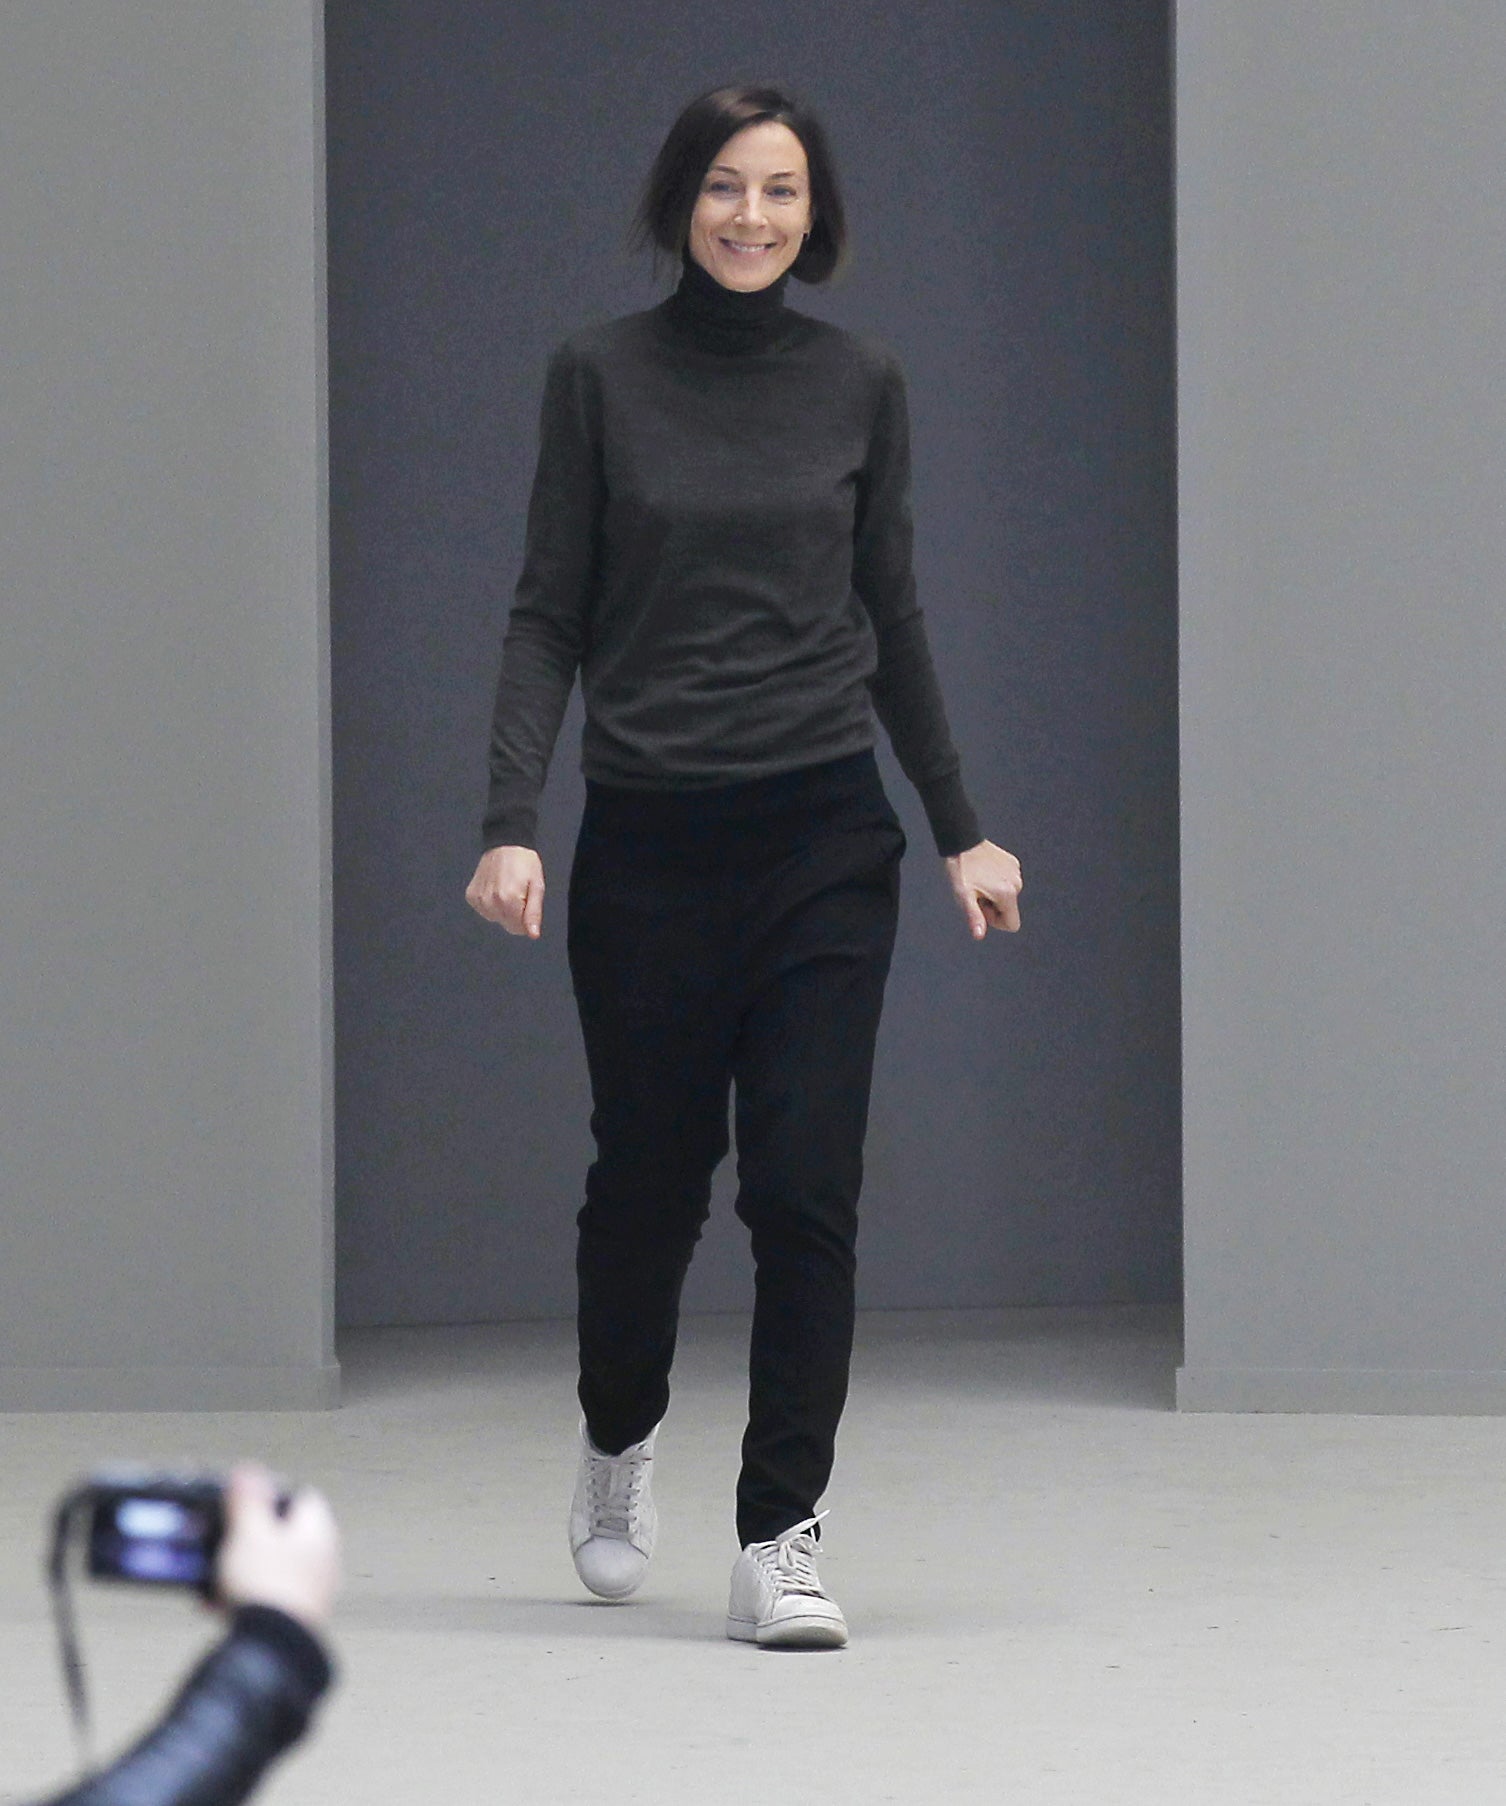 Phoebe Philo's return: What to expect from her new brand launch